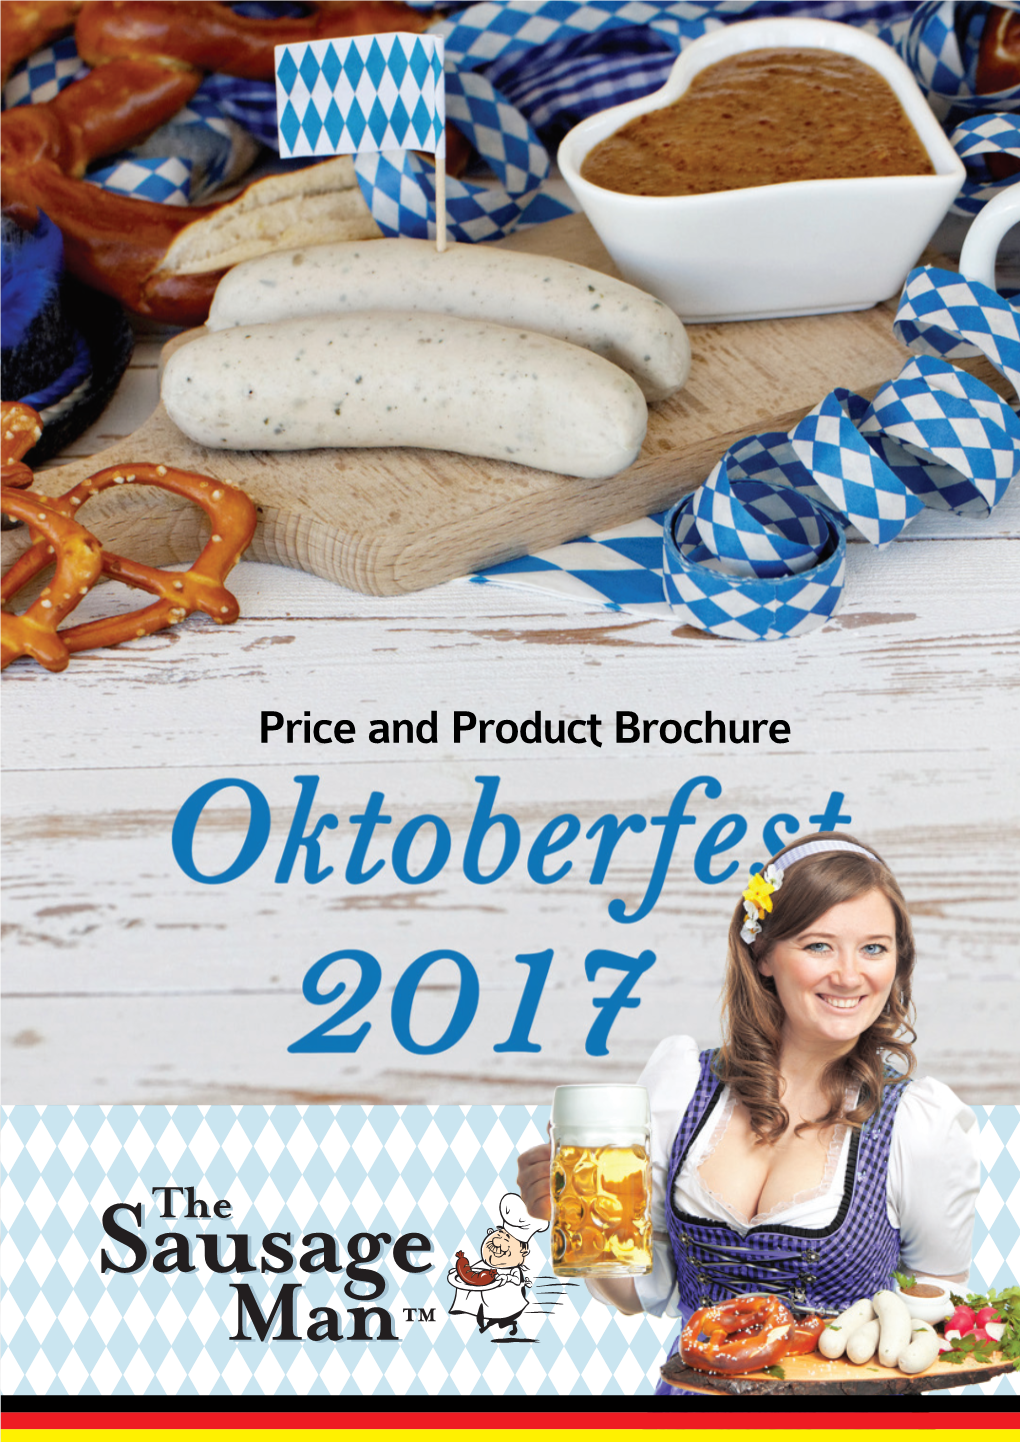 Price and Product Brochure Many of Our Products Are Recognised by the German Agricultural Society As the Best of the Best